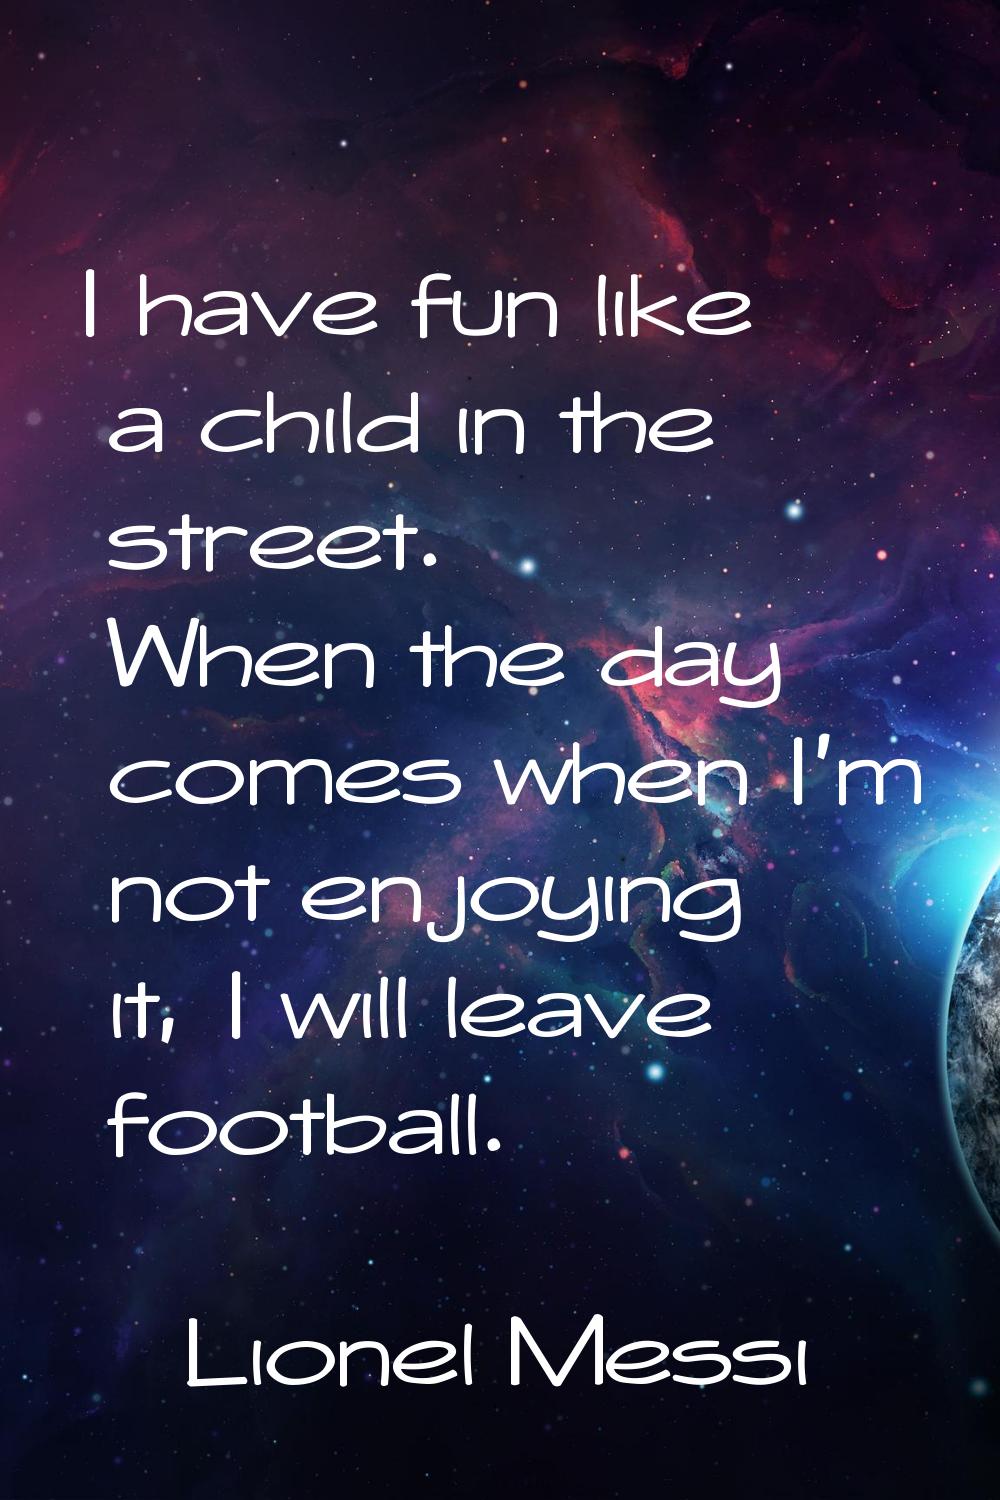 I have fun like a child in the street. When the day comes when I'm not enjoying it, I will leave fo